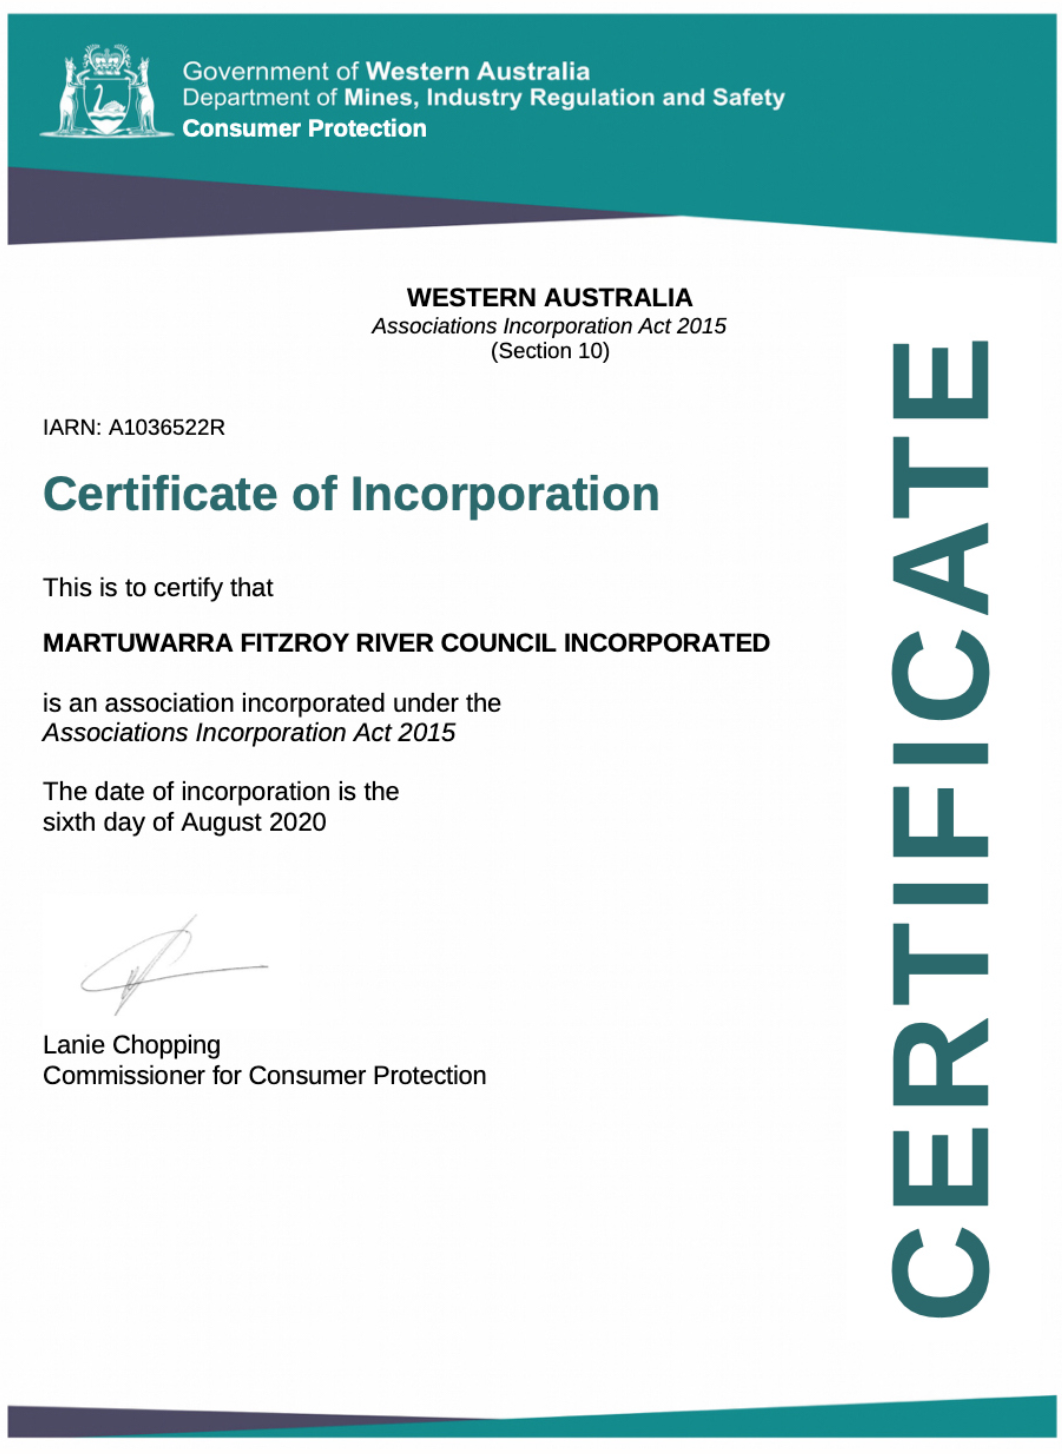 MFRC-Certificate-of-Incorporation.png